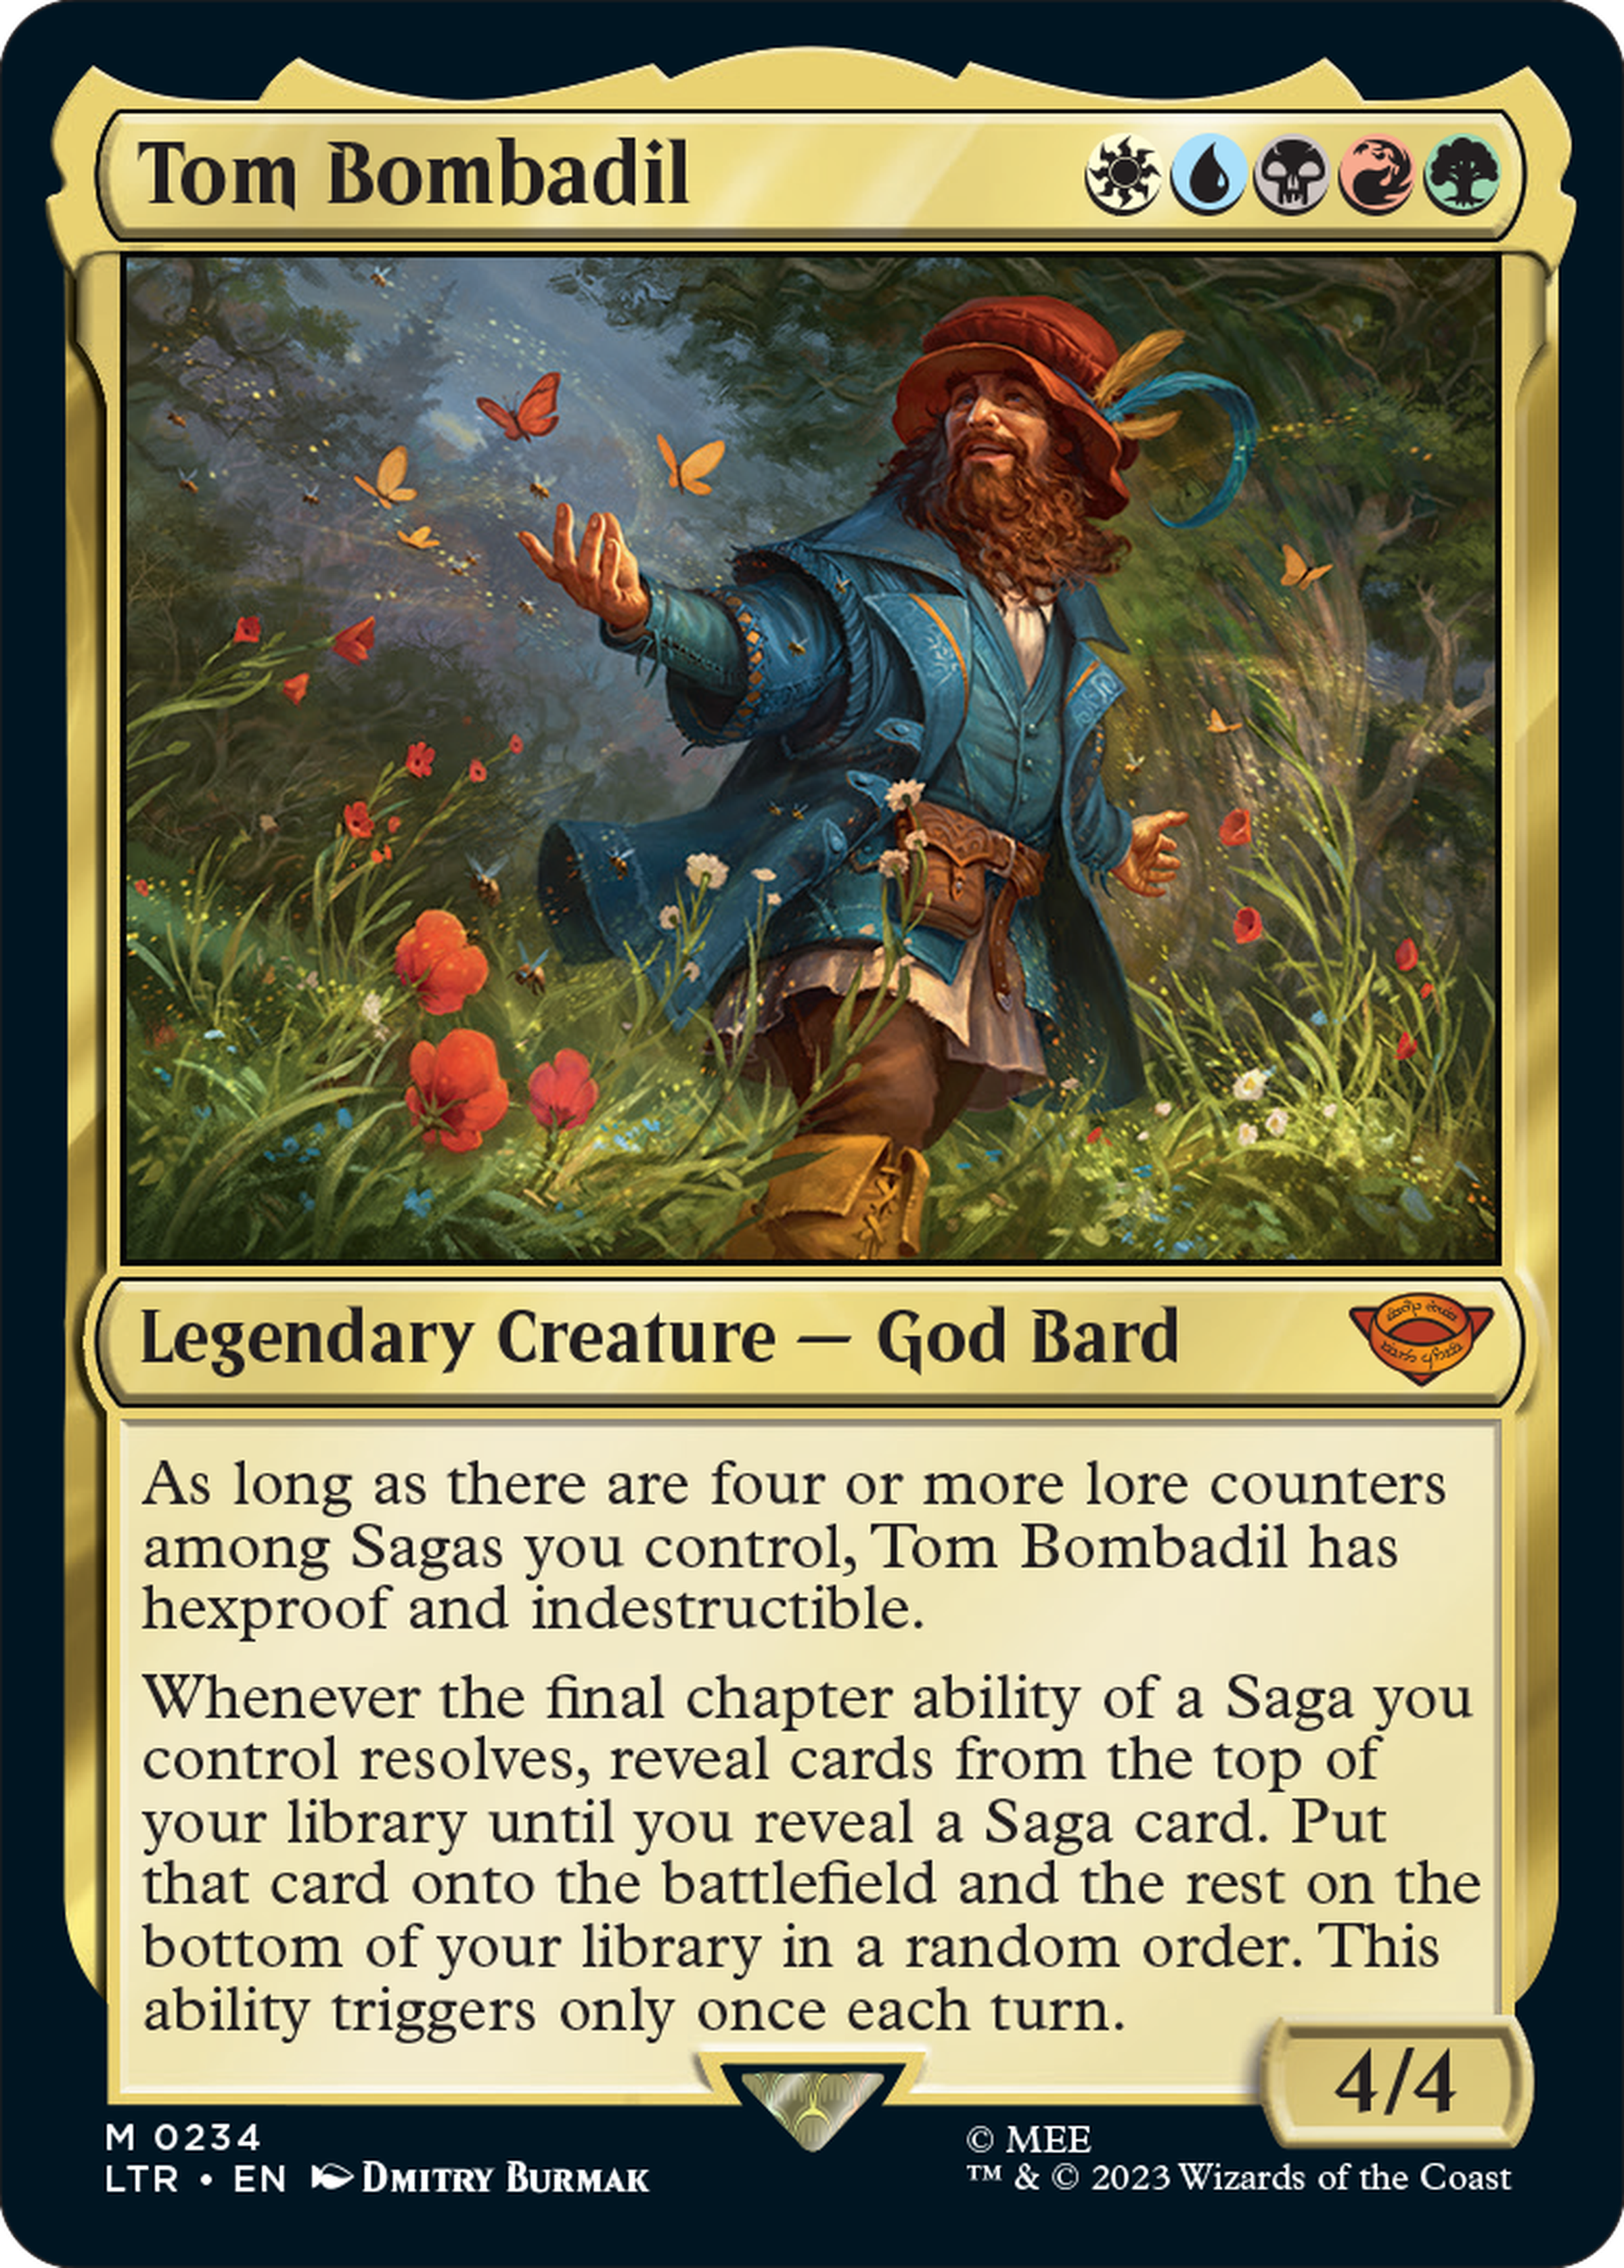 Image of a Magic the Gathering Card the card text reads: As long as there are four or more lore counters among Sagas you control, Tom Bombadil has&nbsp;hexproof&nbsp;and&nbsp;indestructible.Whenever the final chapter ability of a Saga you control resolves, reveal cards from the top of your library until you reveal a Saga card. Put that card onto the battlefield and the rest on the bottom of your library in a random order. This ability triggers only once each turn.